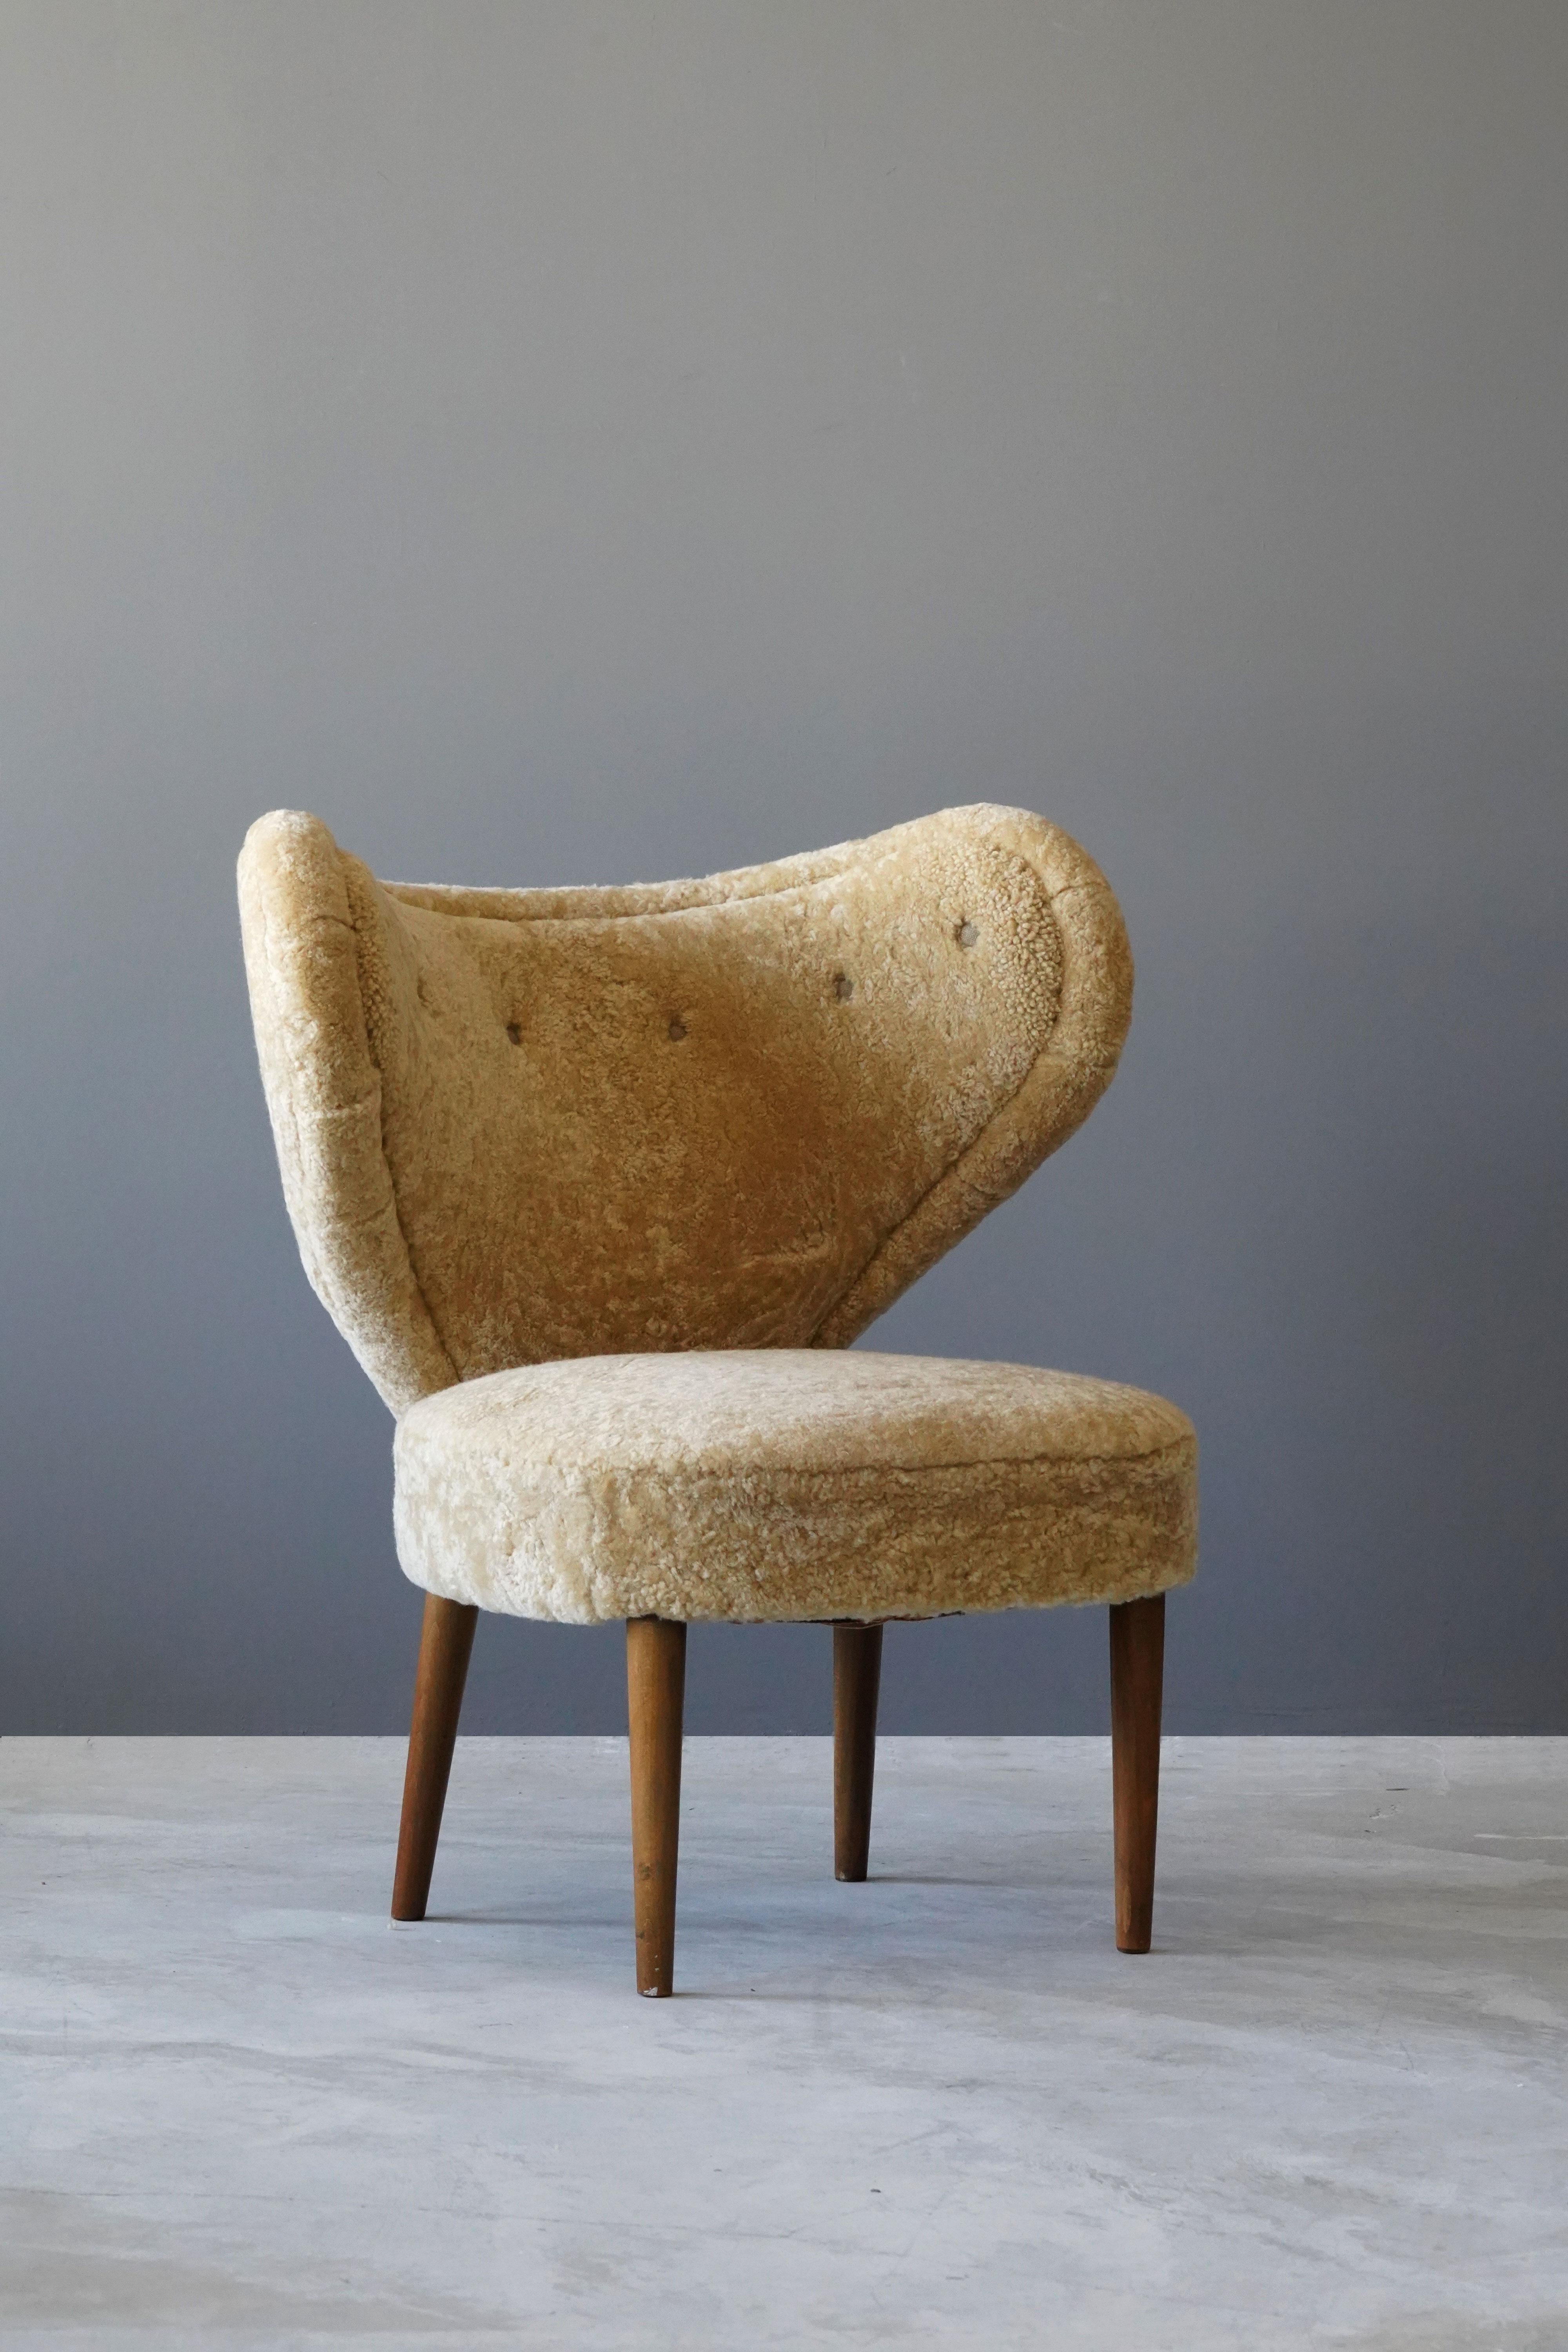 A rare organic lounge chair / high back chair. Design attributed to Magnus Stephensen. The chairs' organic form is further enhanced by sheepskin upholstery. Produced in the late 1940s, or possibly the early 1950s.

Other designers working in similar